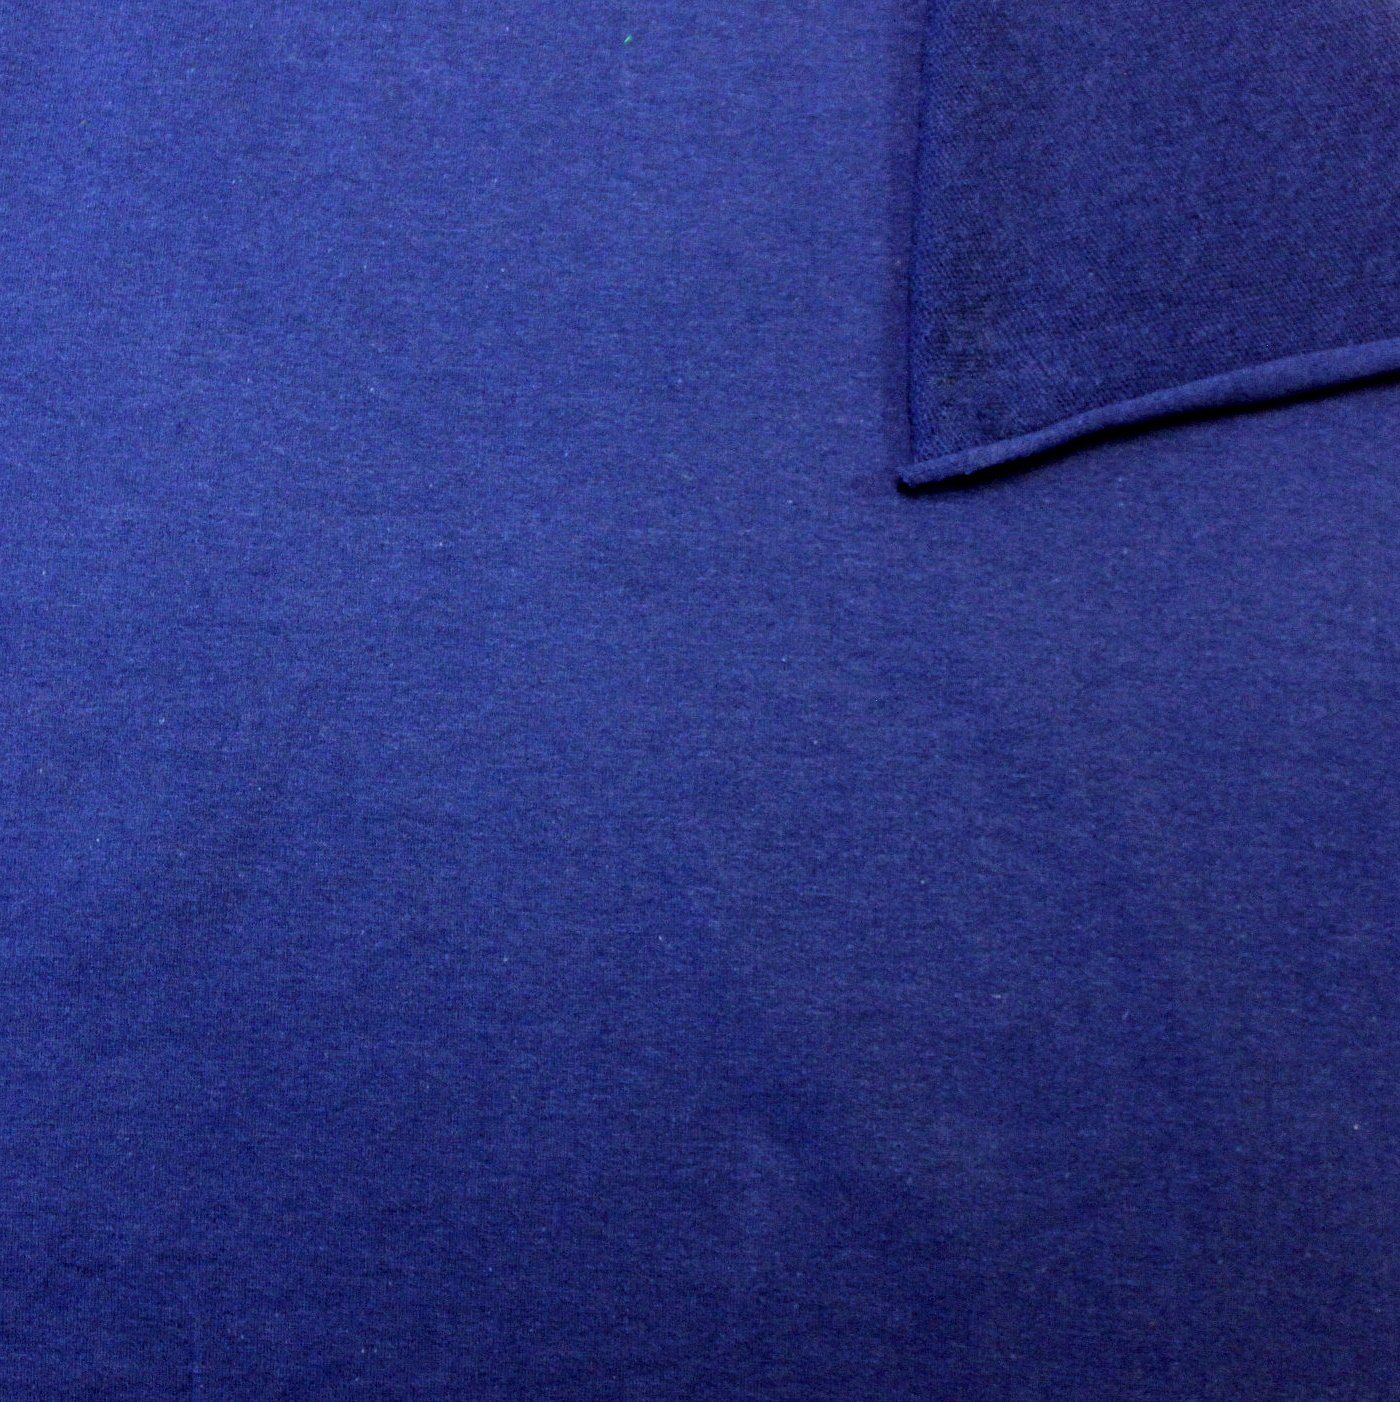 Solid Royal Blue 4 Way Stretch French Terry Knit Fabric With Spandex Fabric,  Raspberry Creek Fabrics